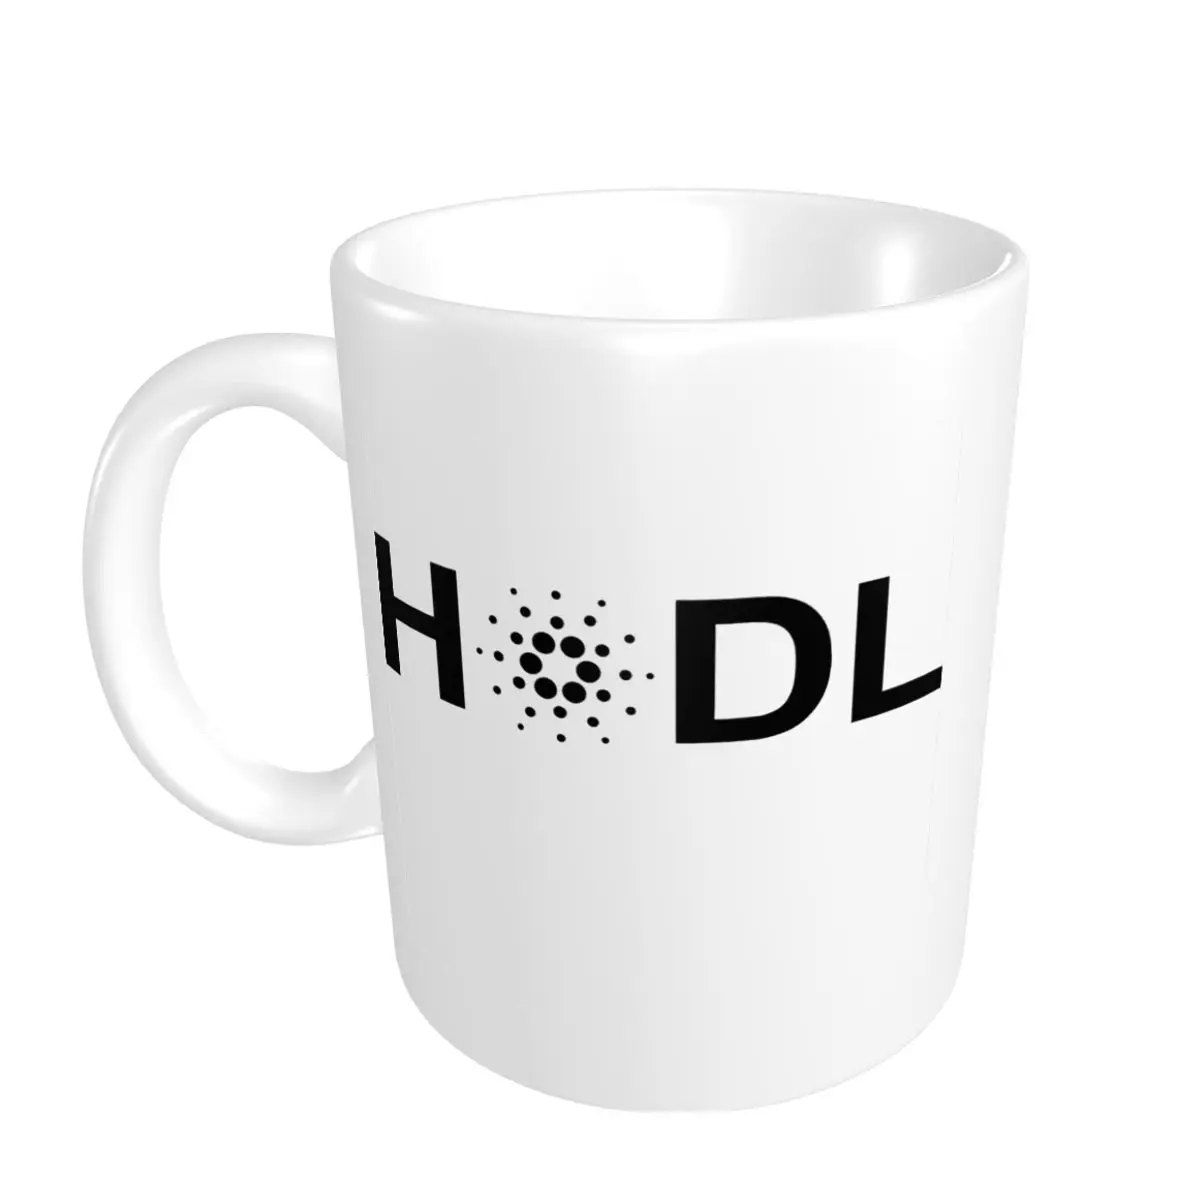 

Promo Novelty HODL Cardano Fitted VNeck Mugs Humor Graphic Xrp CUPS Print coffee cups